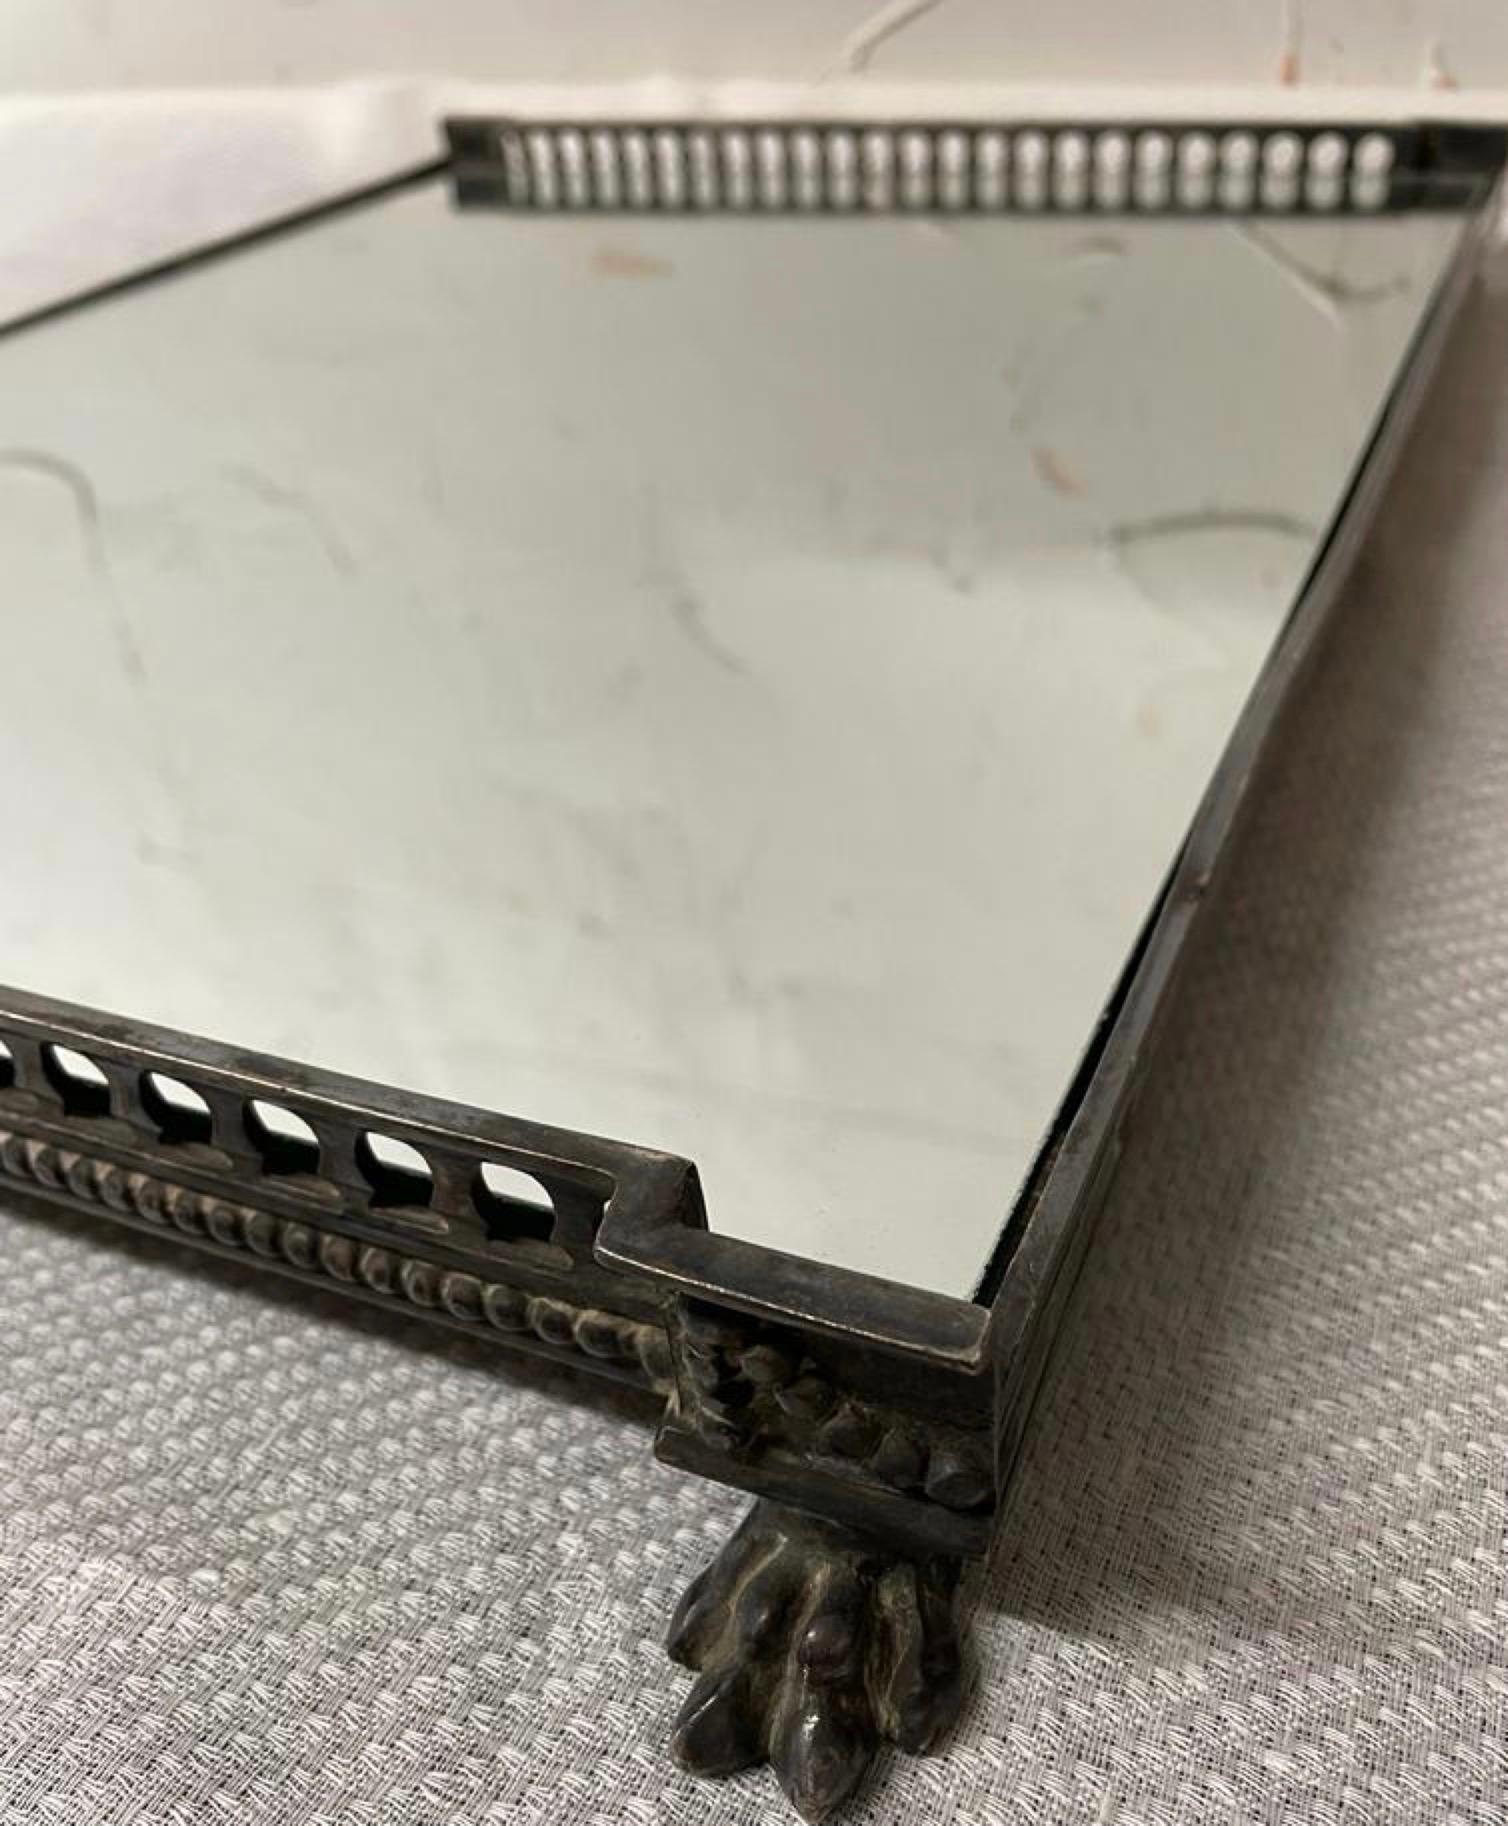 A fine Edwardian style gallery silver plated serving tray with mirrored insert backed by wood.
The tray is supported by 4 paw feet adding extra style and character.
OFFERING FREE SHIPPING WITHIN US CONTINENT.  PLEASE JUST ASK FOR SHIPPING QUOTE.